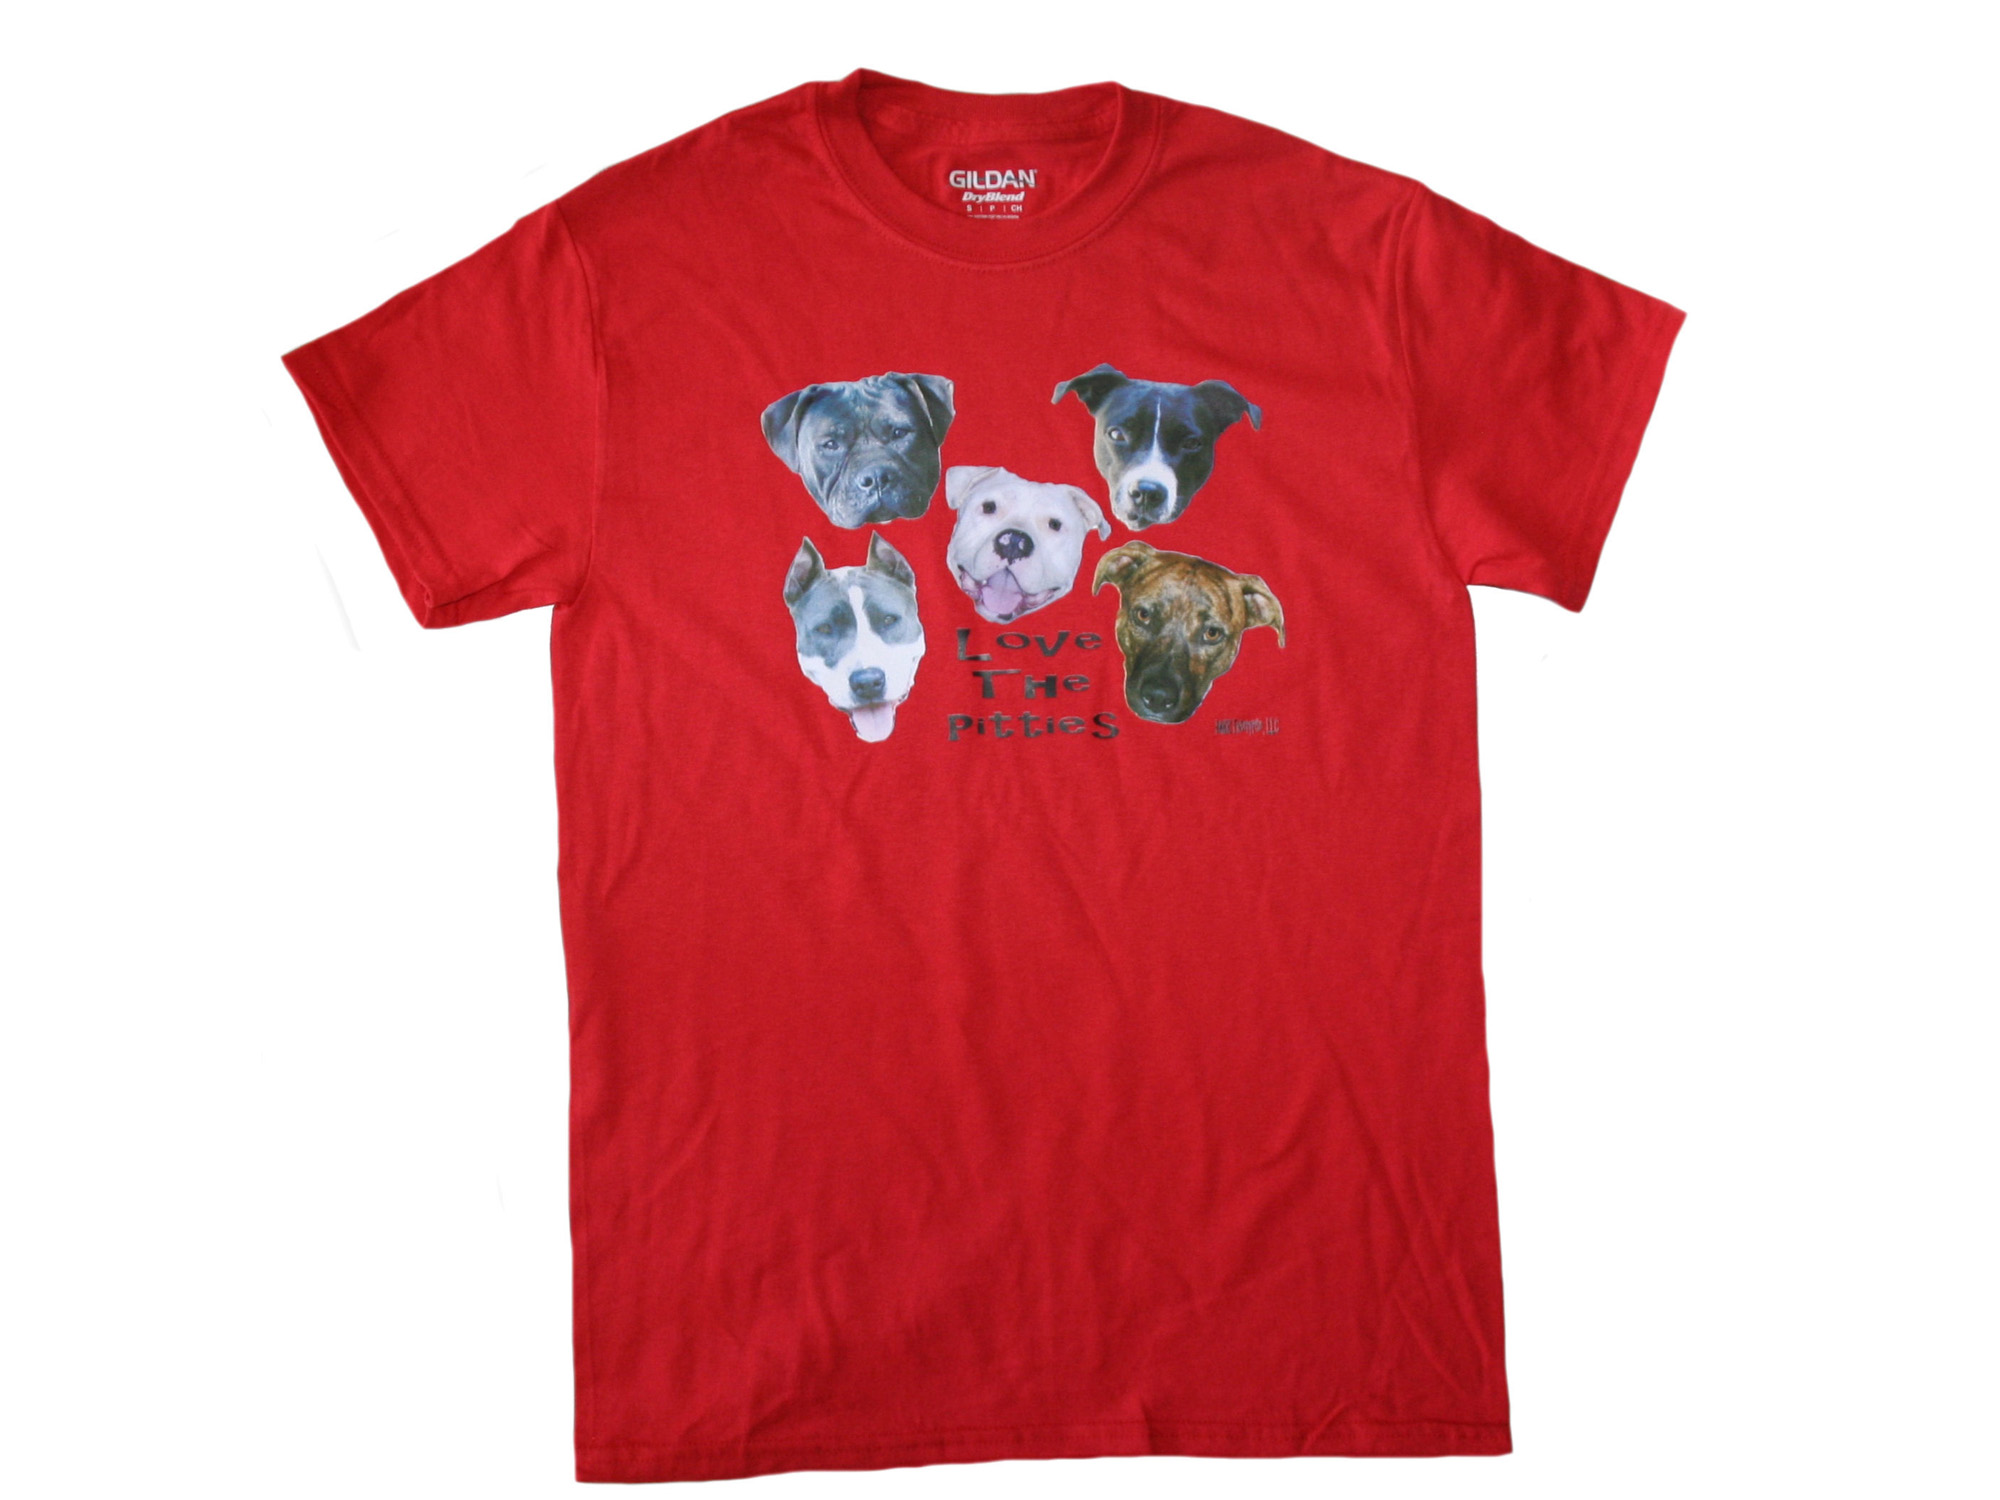 Pit Bull Love The Pitties Adult Unisex Pit Bull T-Shirt Pitbull Gifts, Pitbull Accessories Pit Bull Dad, Mom - image 1 of 1